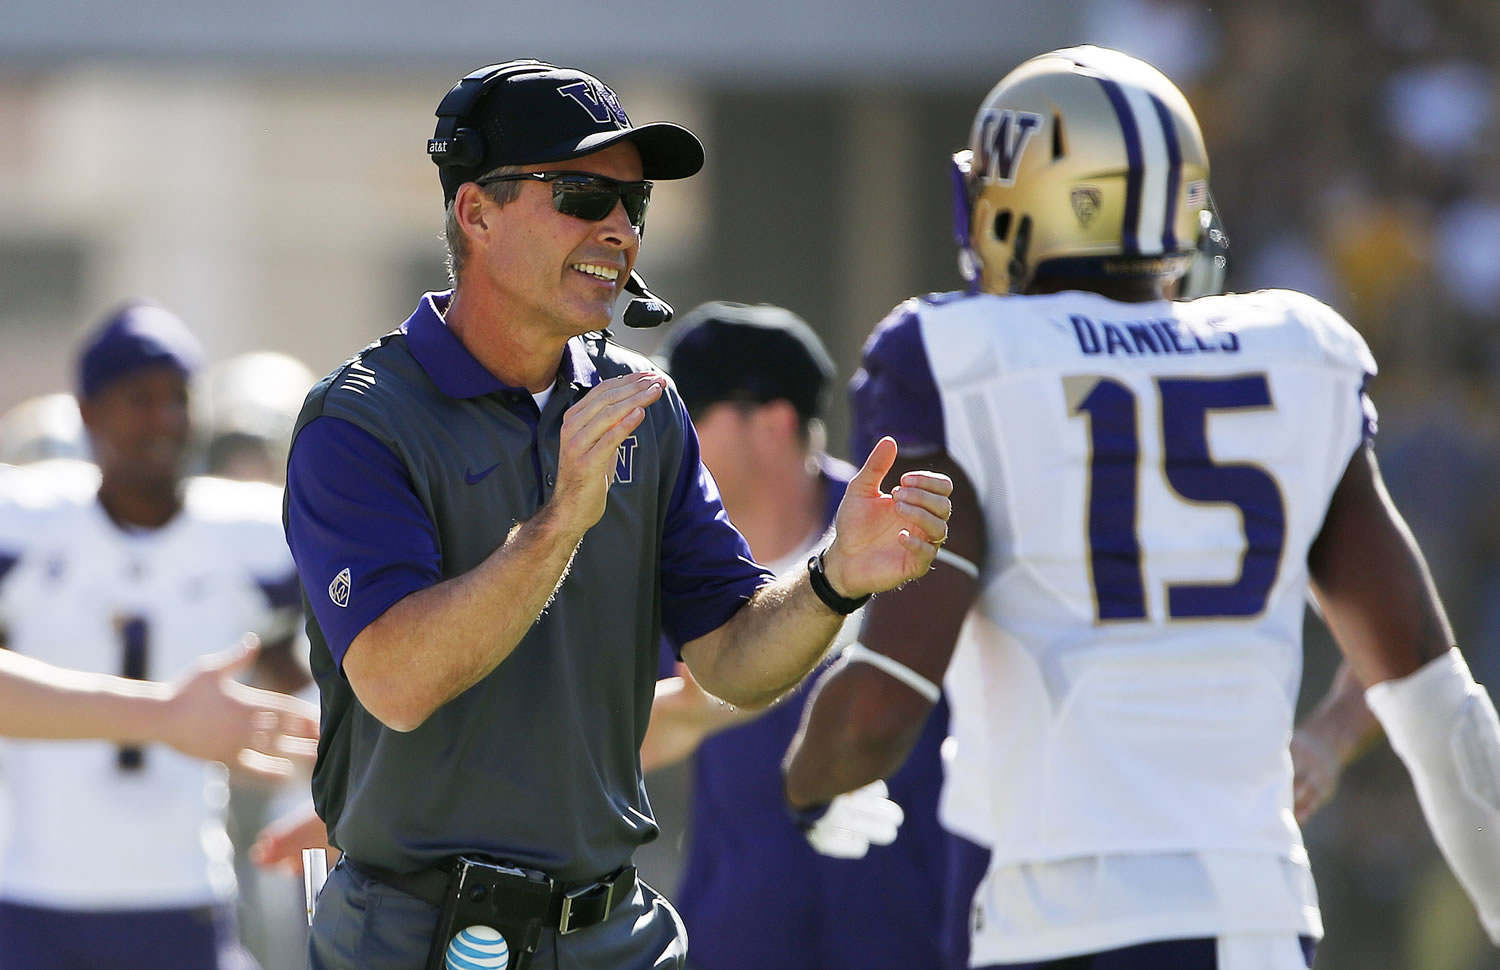 Washington head coach Chris Petersen applauds his players after a touchdown against Arizona State during the first half of an NCAA college football game Saturday, Nov. 14, 2015, in Tempe, Ariz. (AP Photo/Ross D.